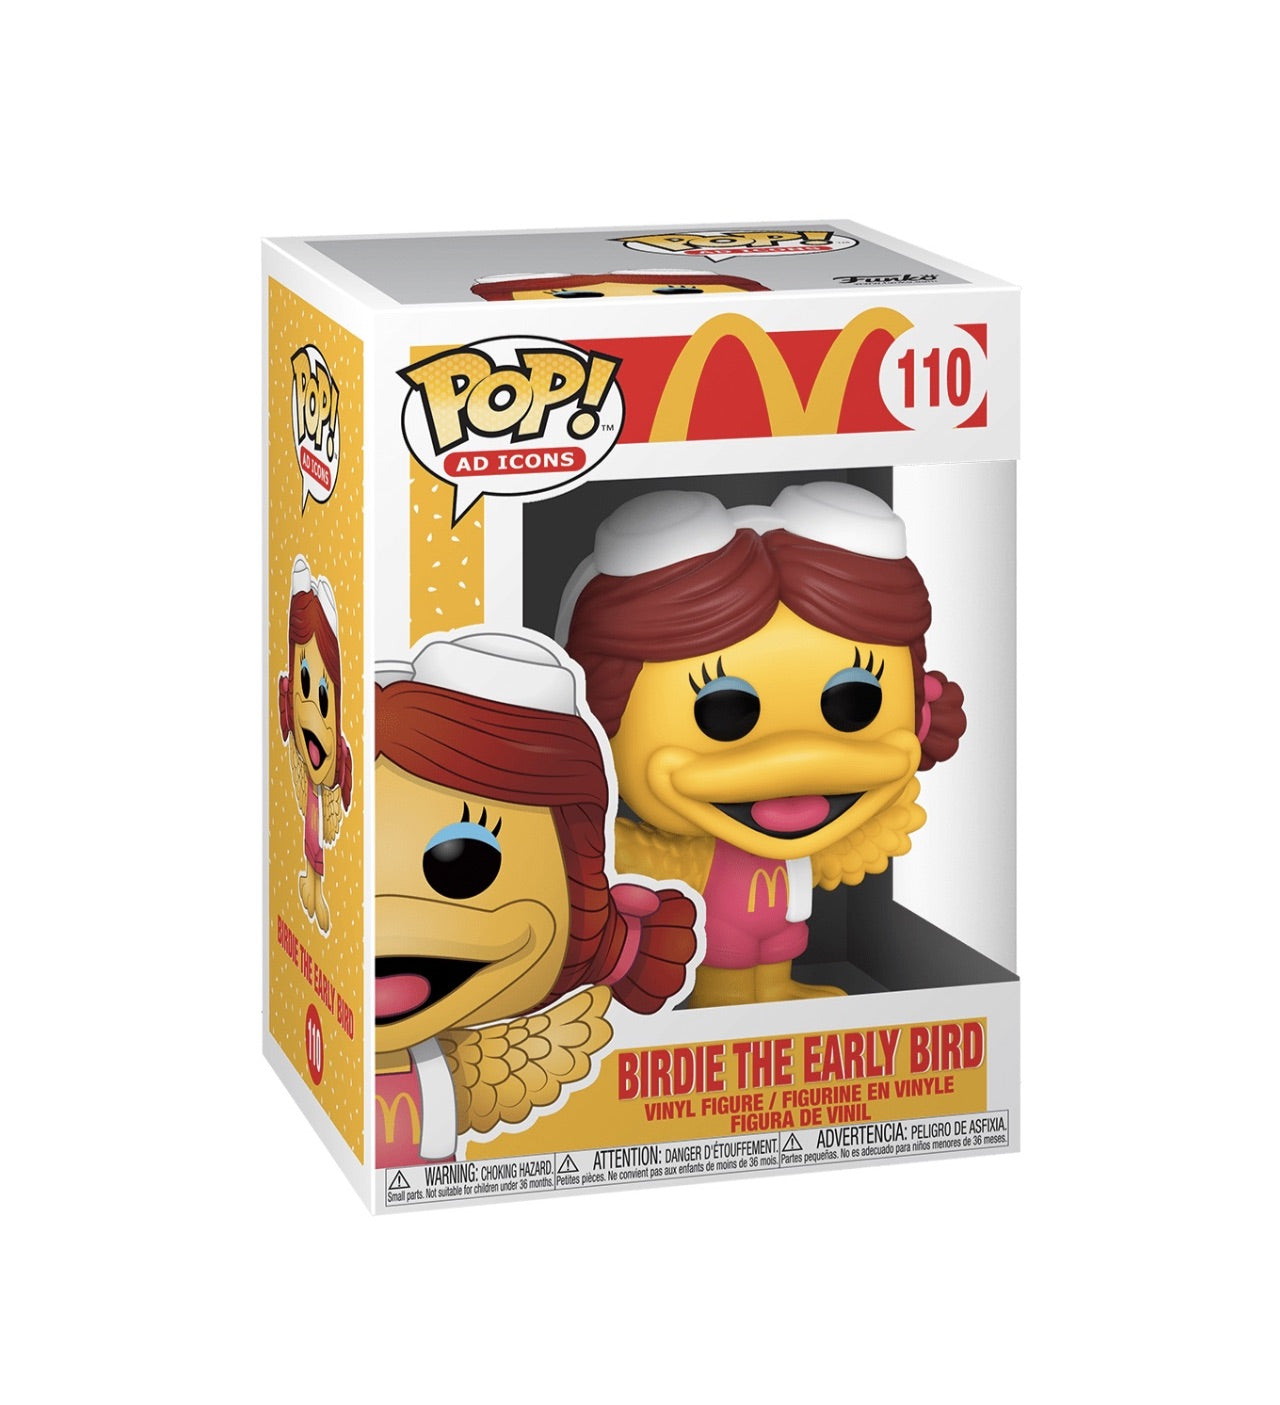 Funko Pop Whoppers Box AD Icons